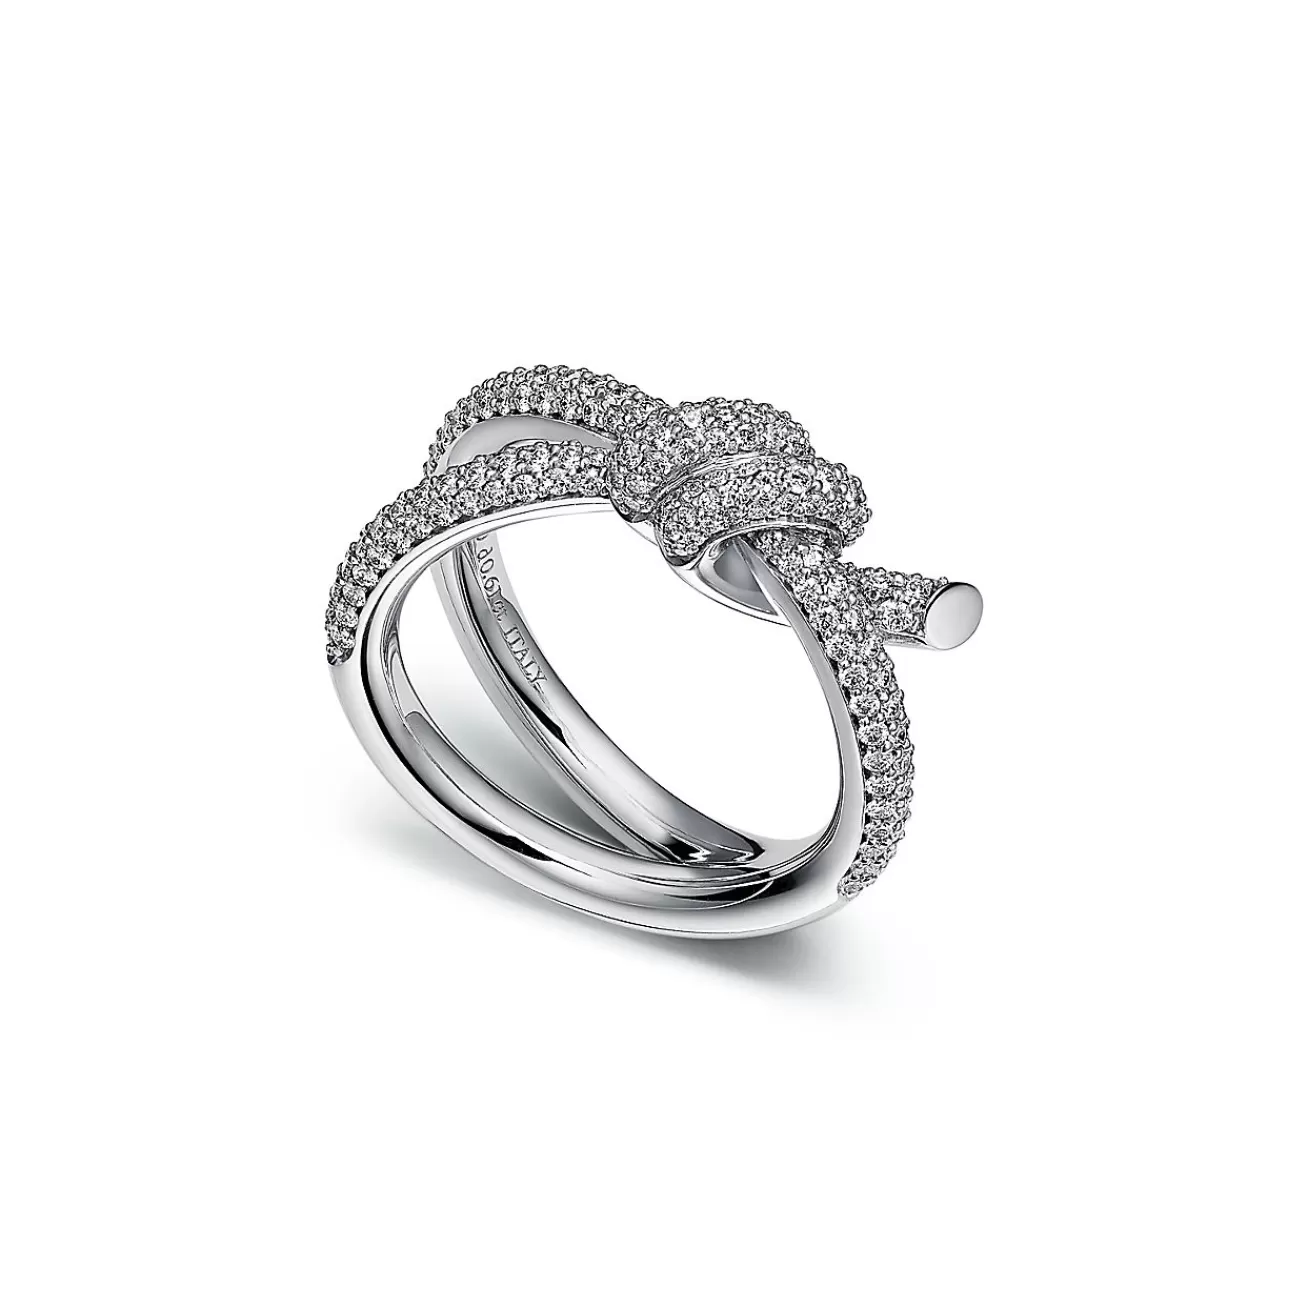 Tiffany & Co. Tiffany Knot Double Row Ring in White Gold with Diamonds | ^ Rings | Diamond Jewelry